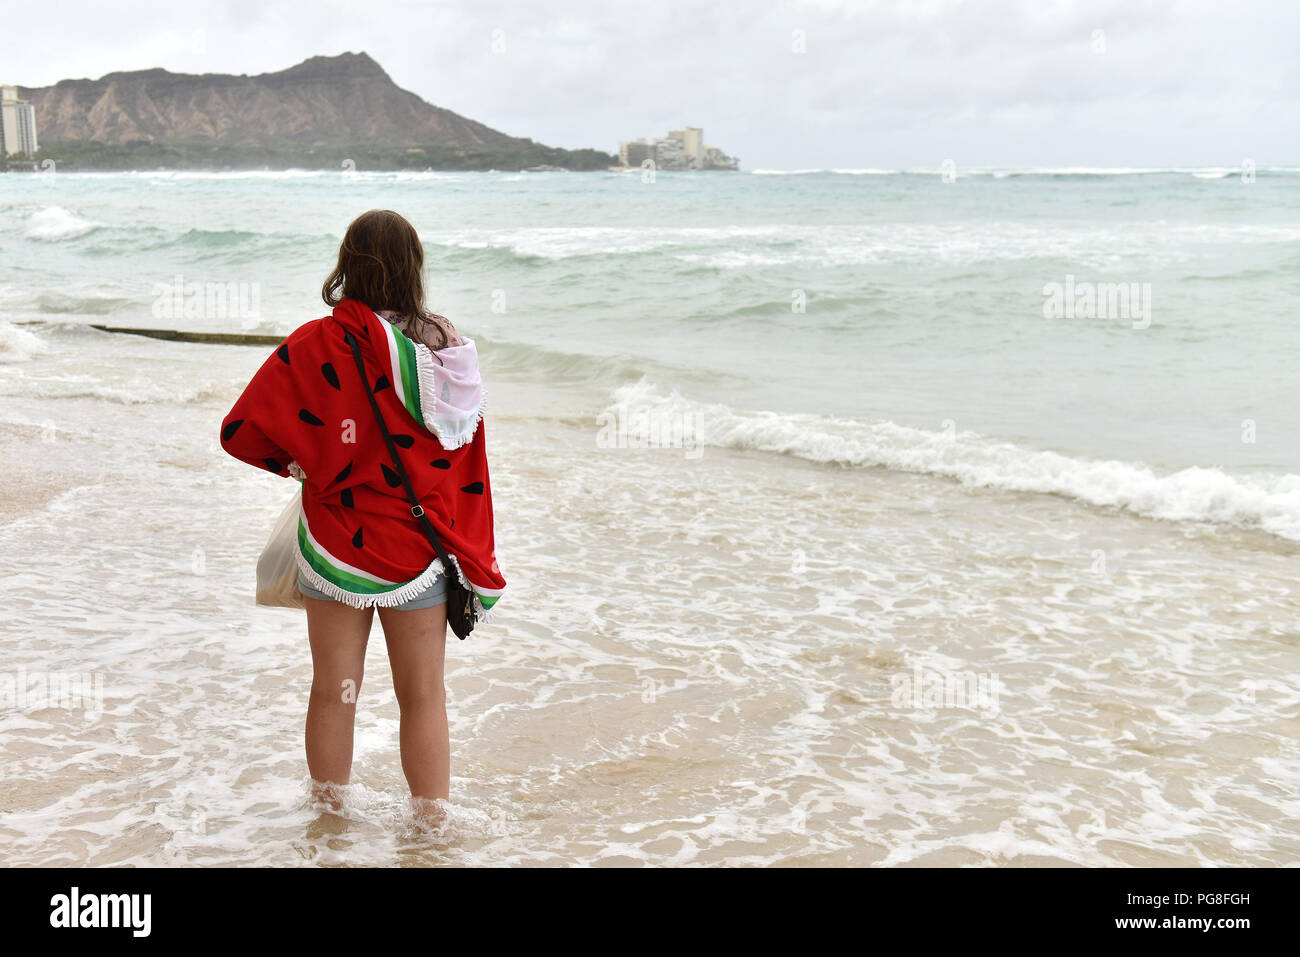 (180824) -- HONOLULU, Aug. 24, 2018 (Xinhua) -- A woman watches the tides at Waikiki beach in Honolulu of Hawaii, the United States, Aug. 23, 2018. Hurricane Lane, predicted as the biggest weather threat to Hawaii in decades, moved perilously close to the Aloha State Thursday morning, triggering heavy rain, landslide and flooding. (Xinhua/Sun Ruibo) (dtf) Stock Photo